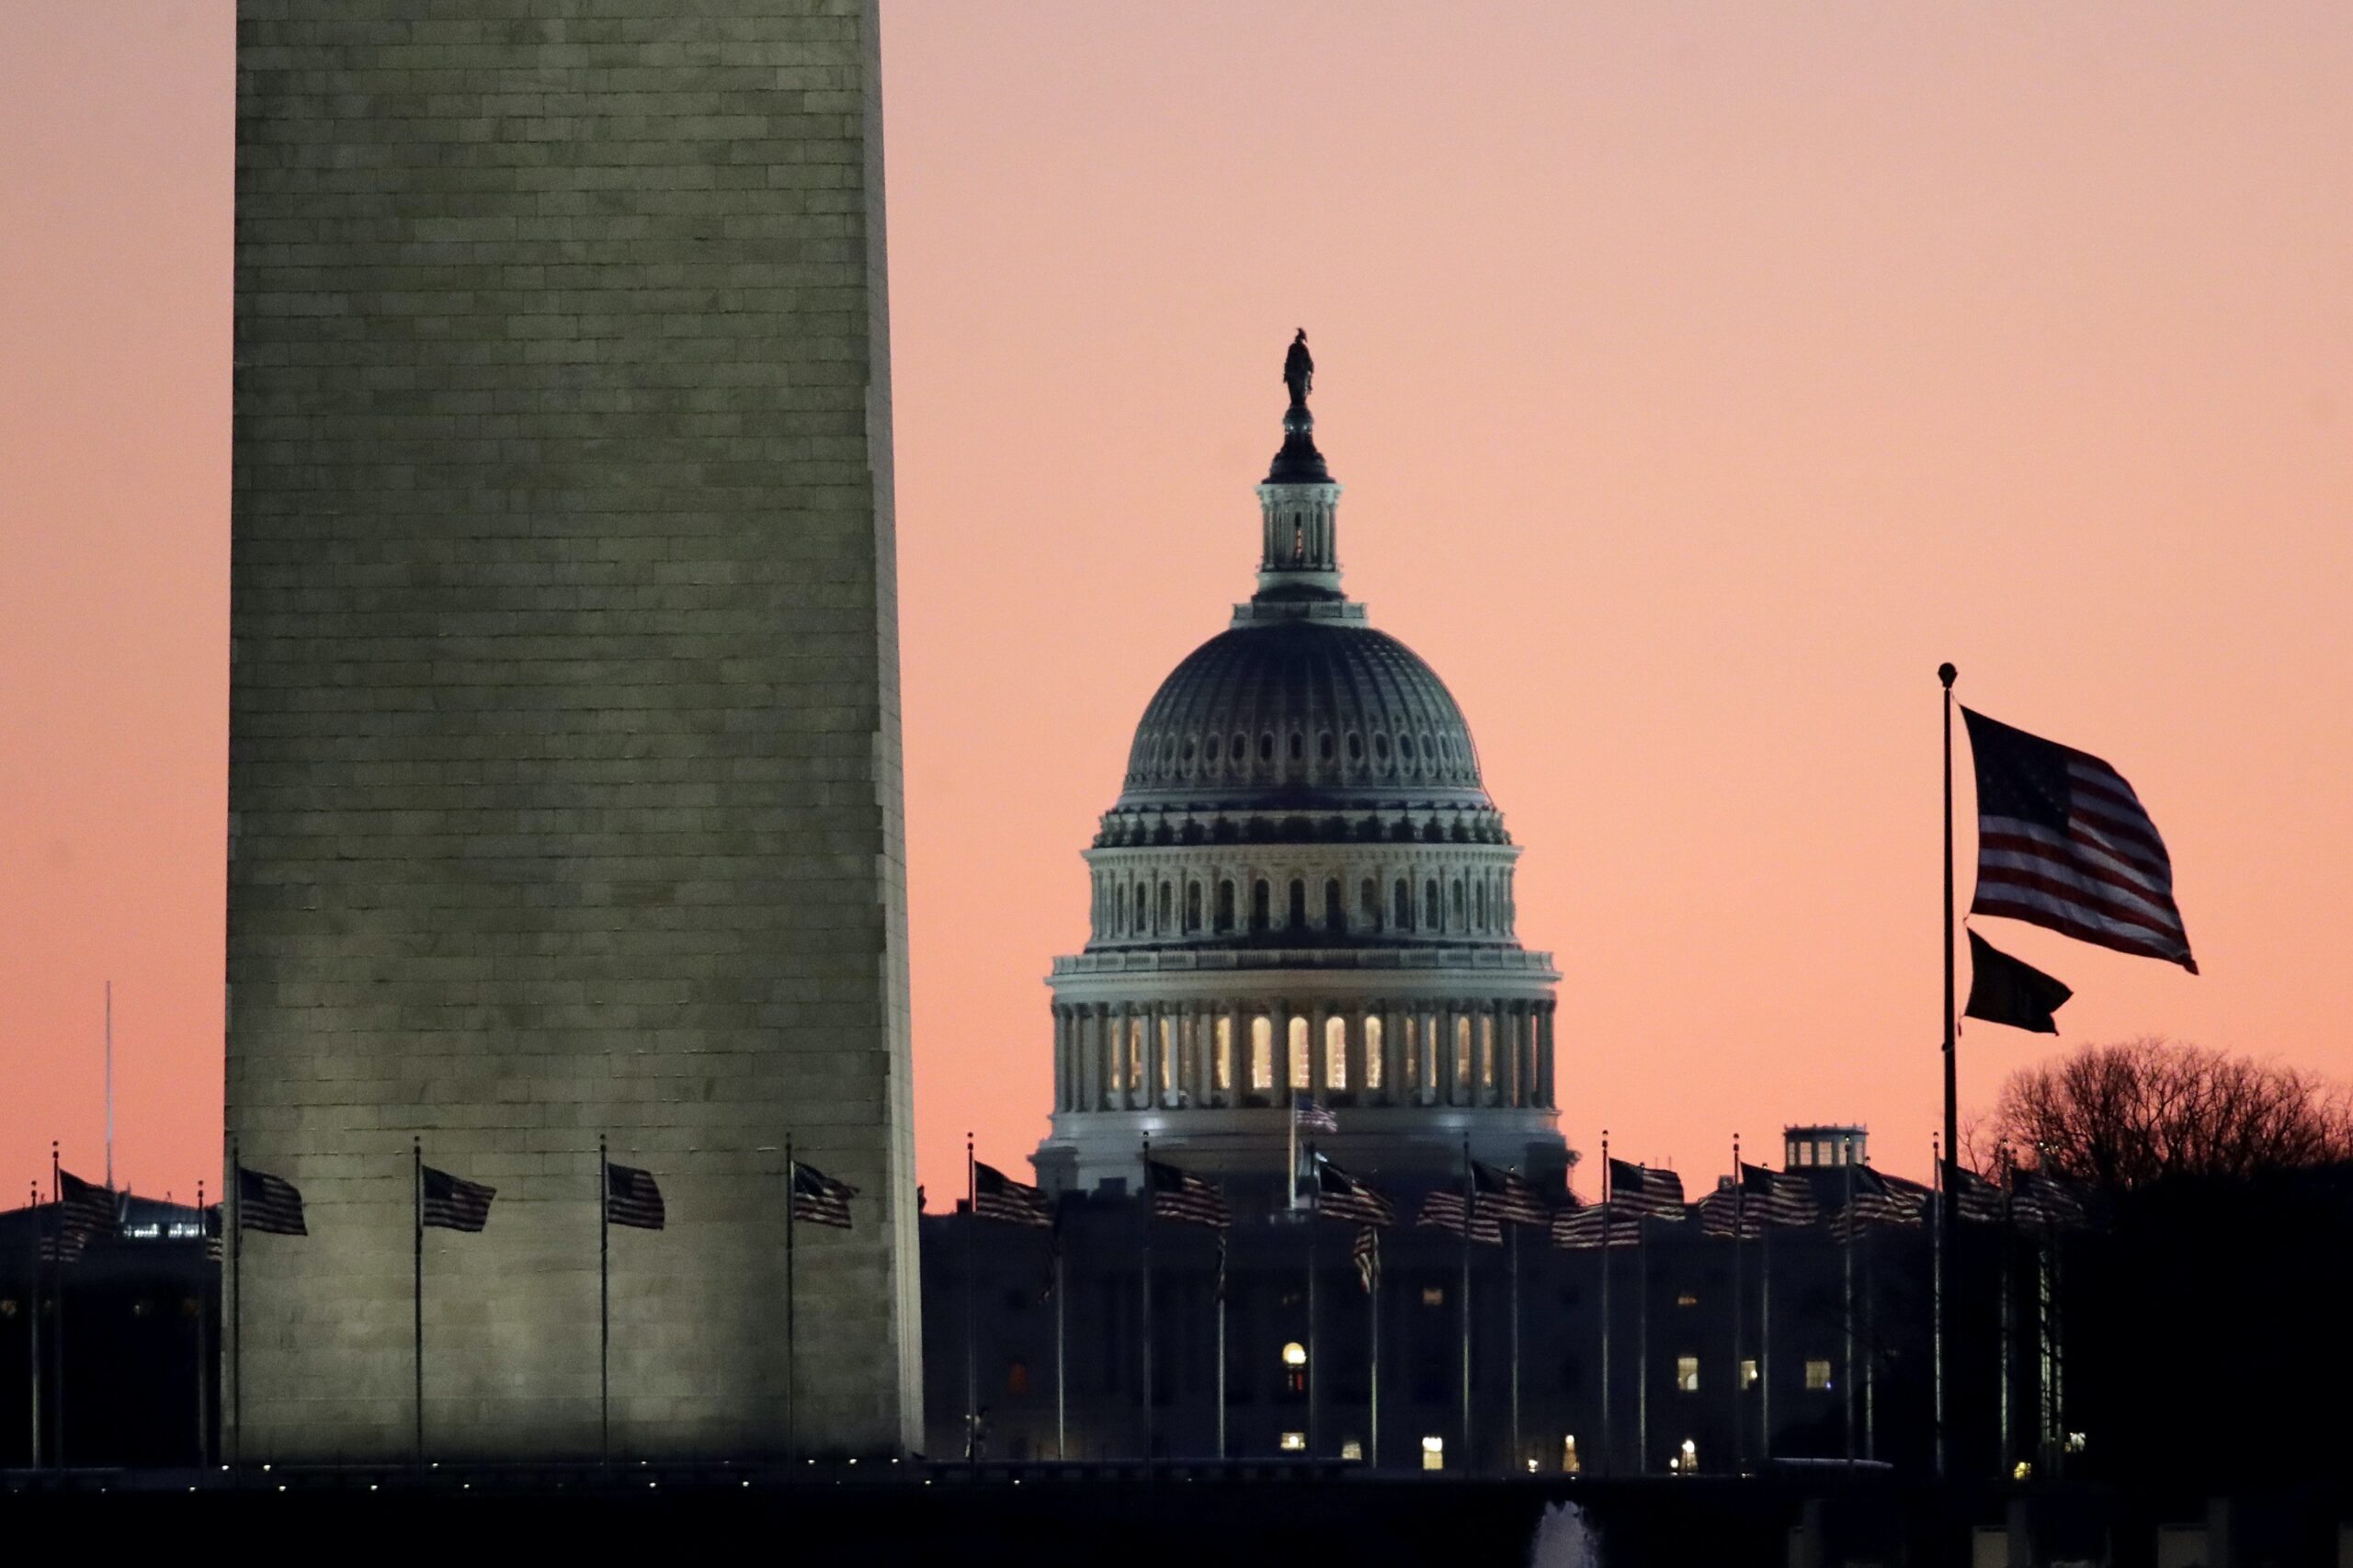 The U.S. Capitol building is seen next to the bottom part of the Washington Monument